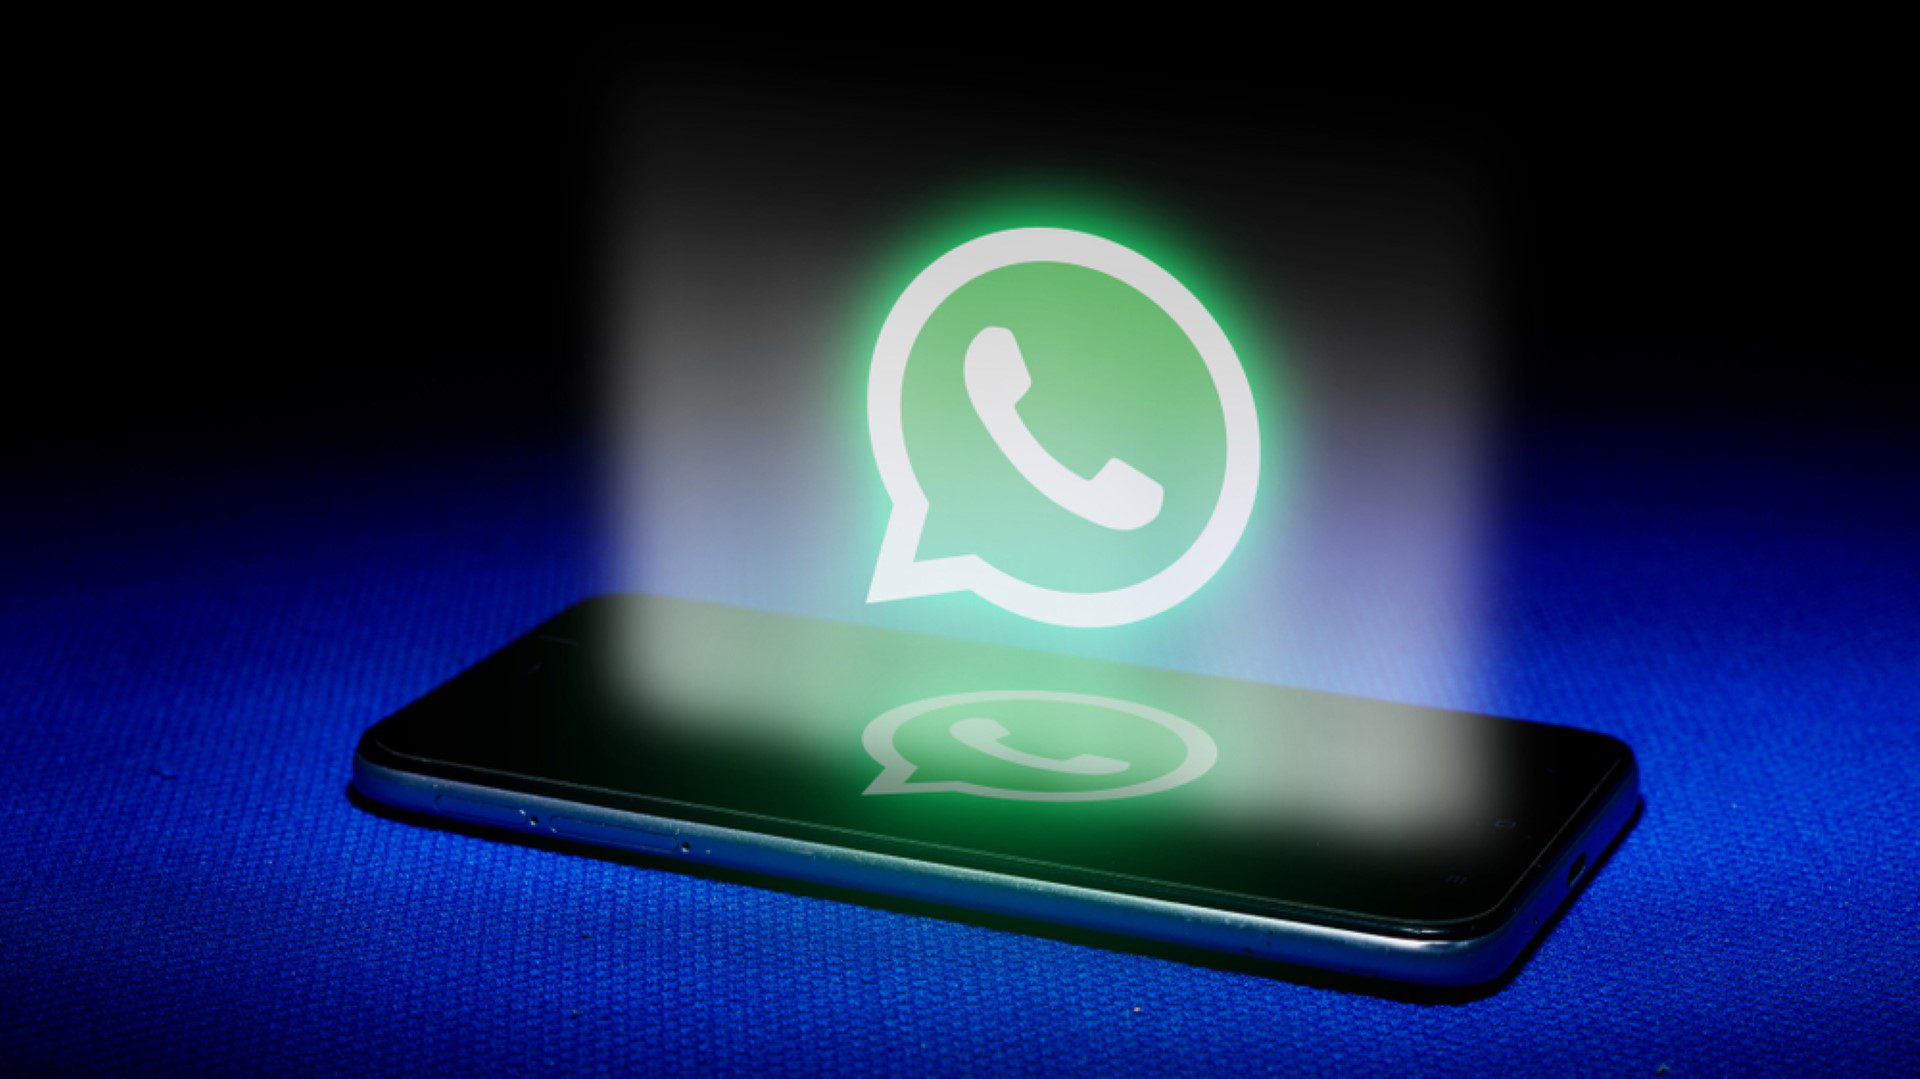 whatsapp privacy changes